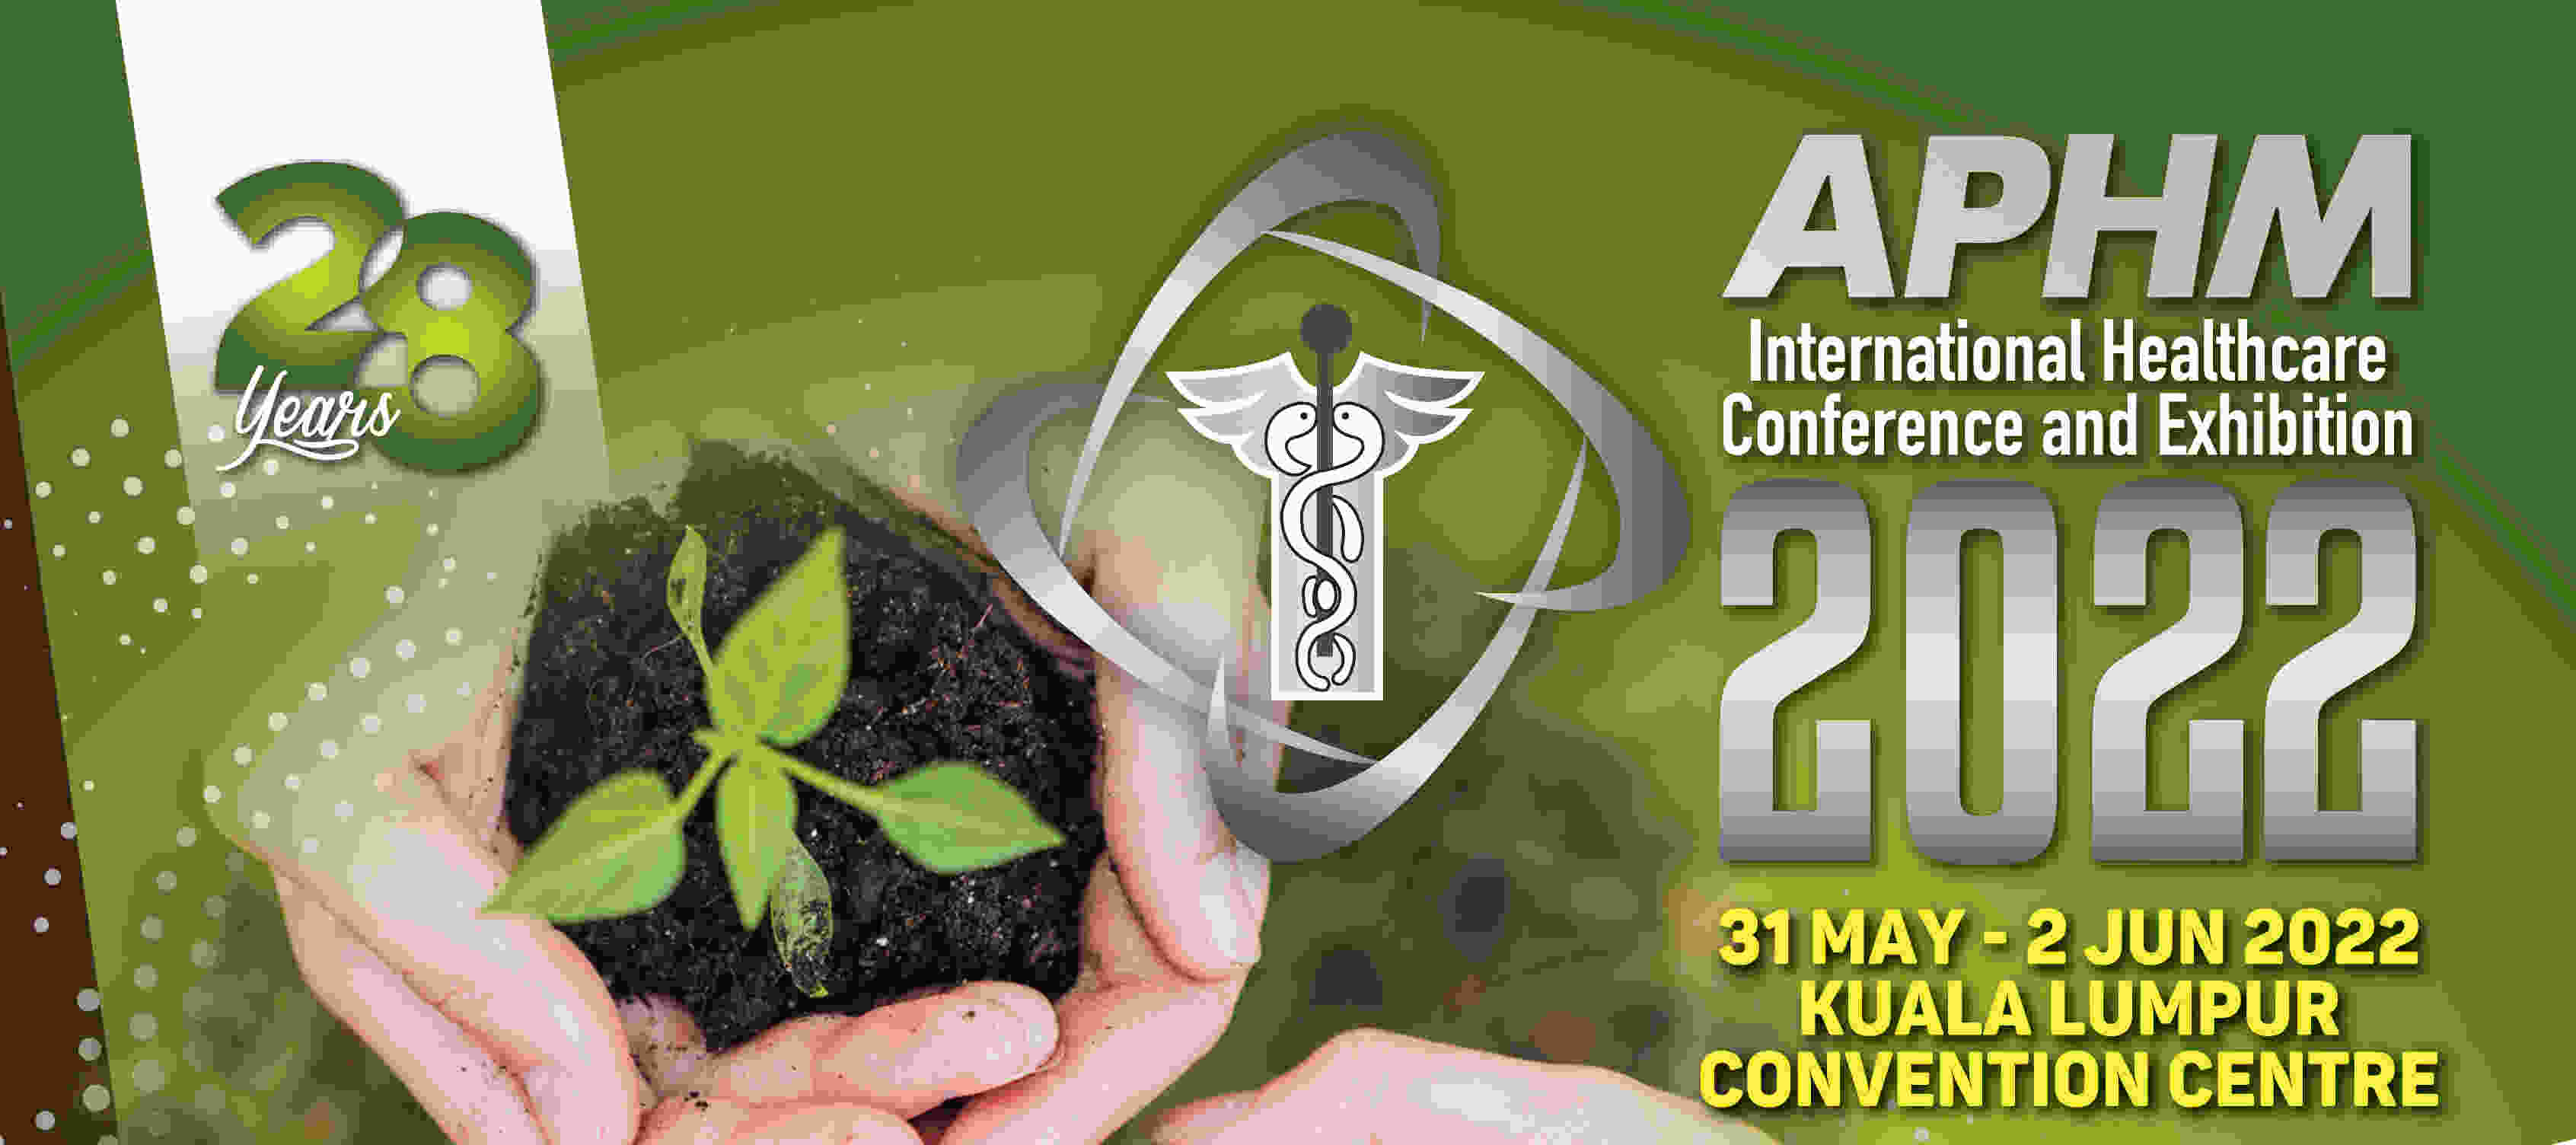 APHM Conference & Exhibition